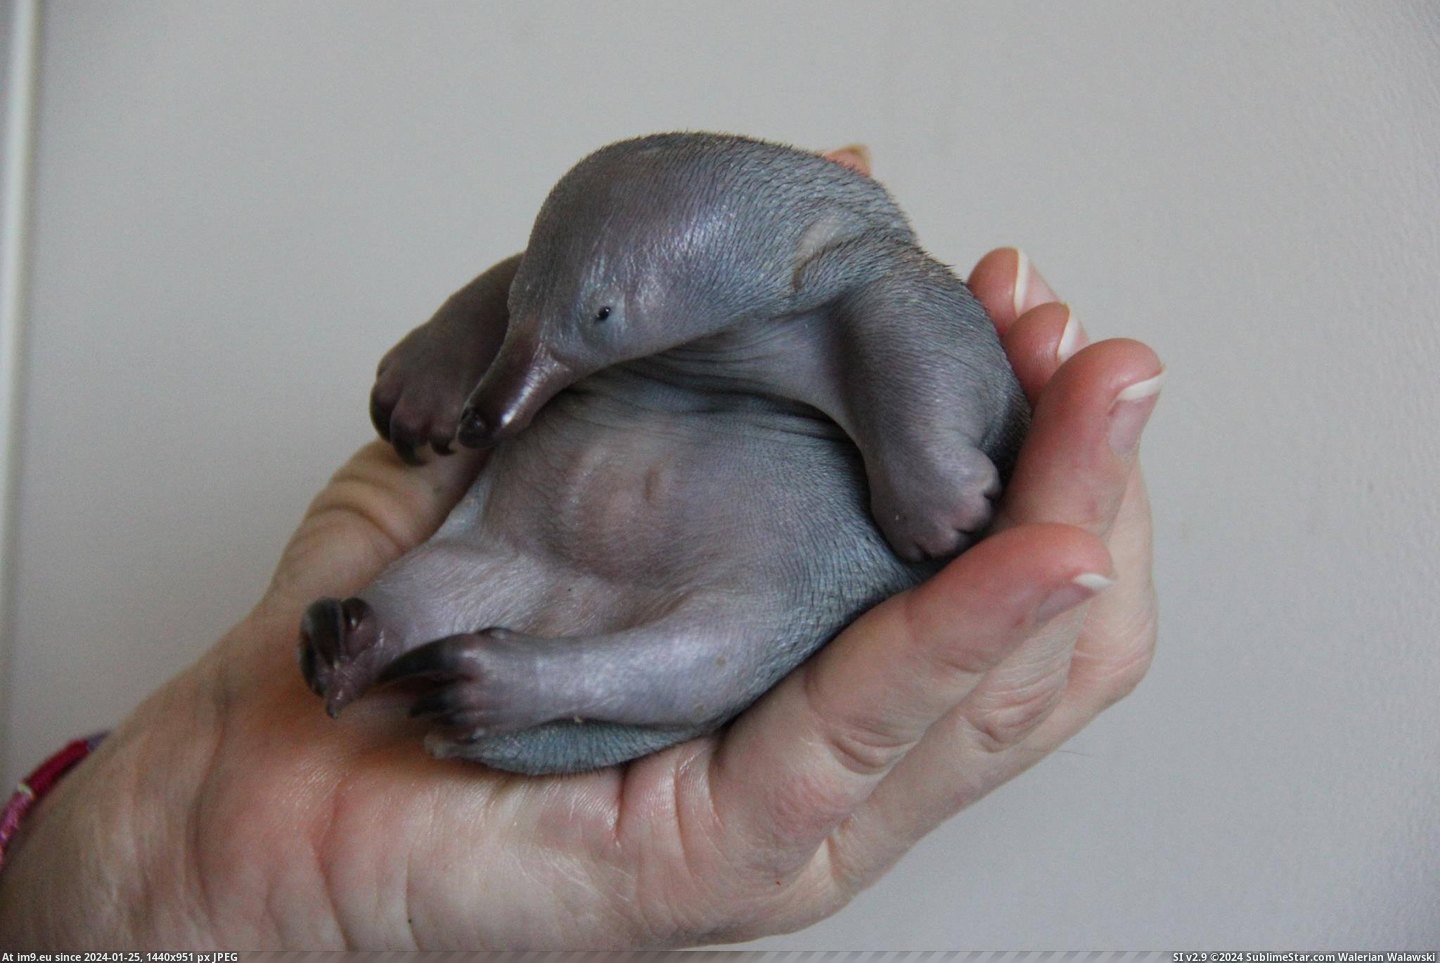 #Day #Old #Echidna #Named #Beau [Aww] A 40 day old Echidna named Beau Pic. (Изображение из альбом My r/AWW favs))